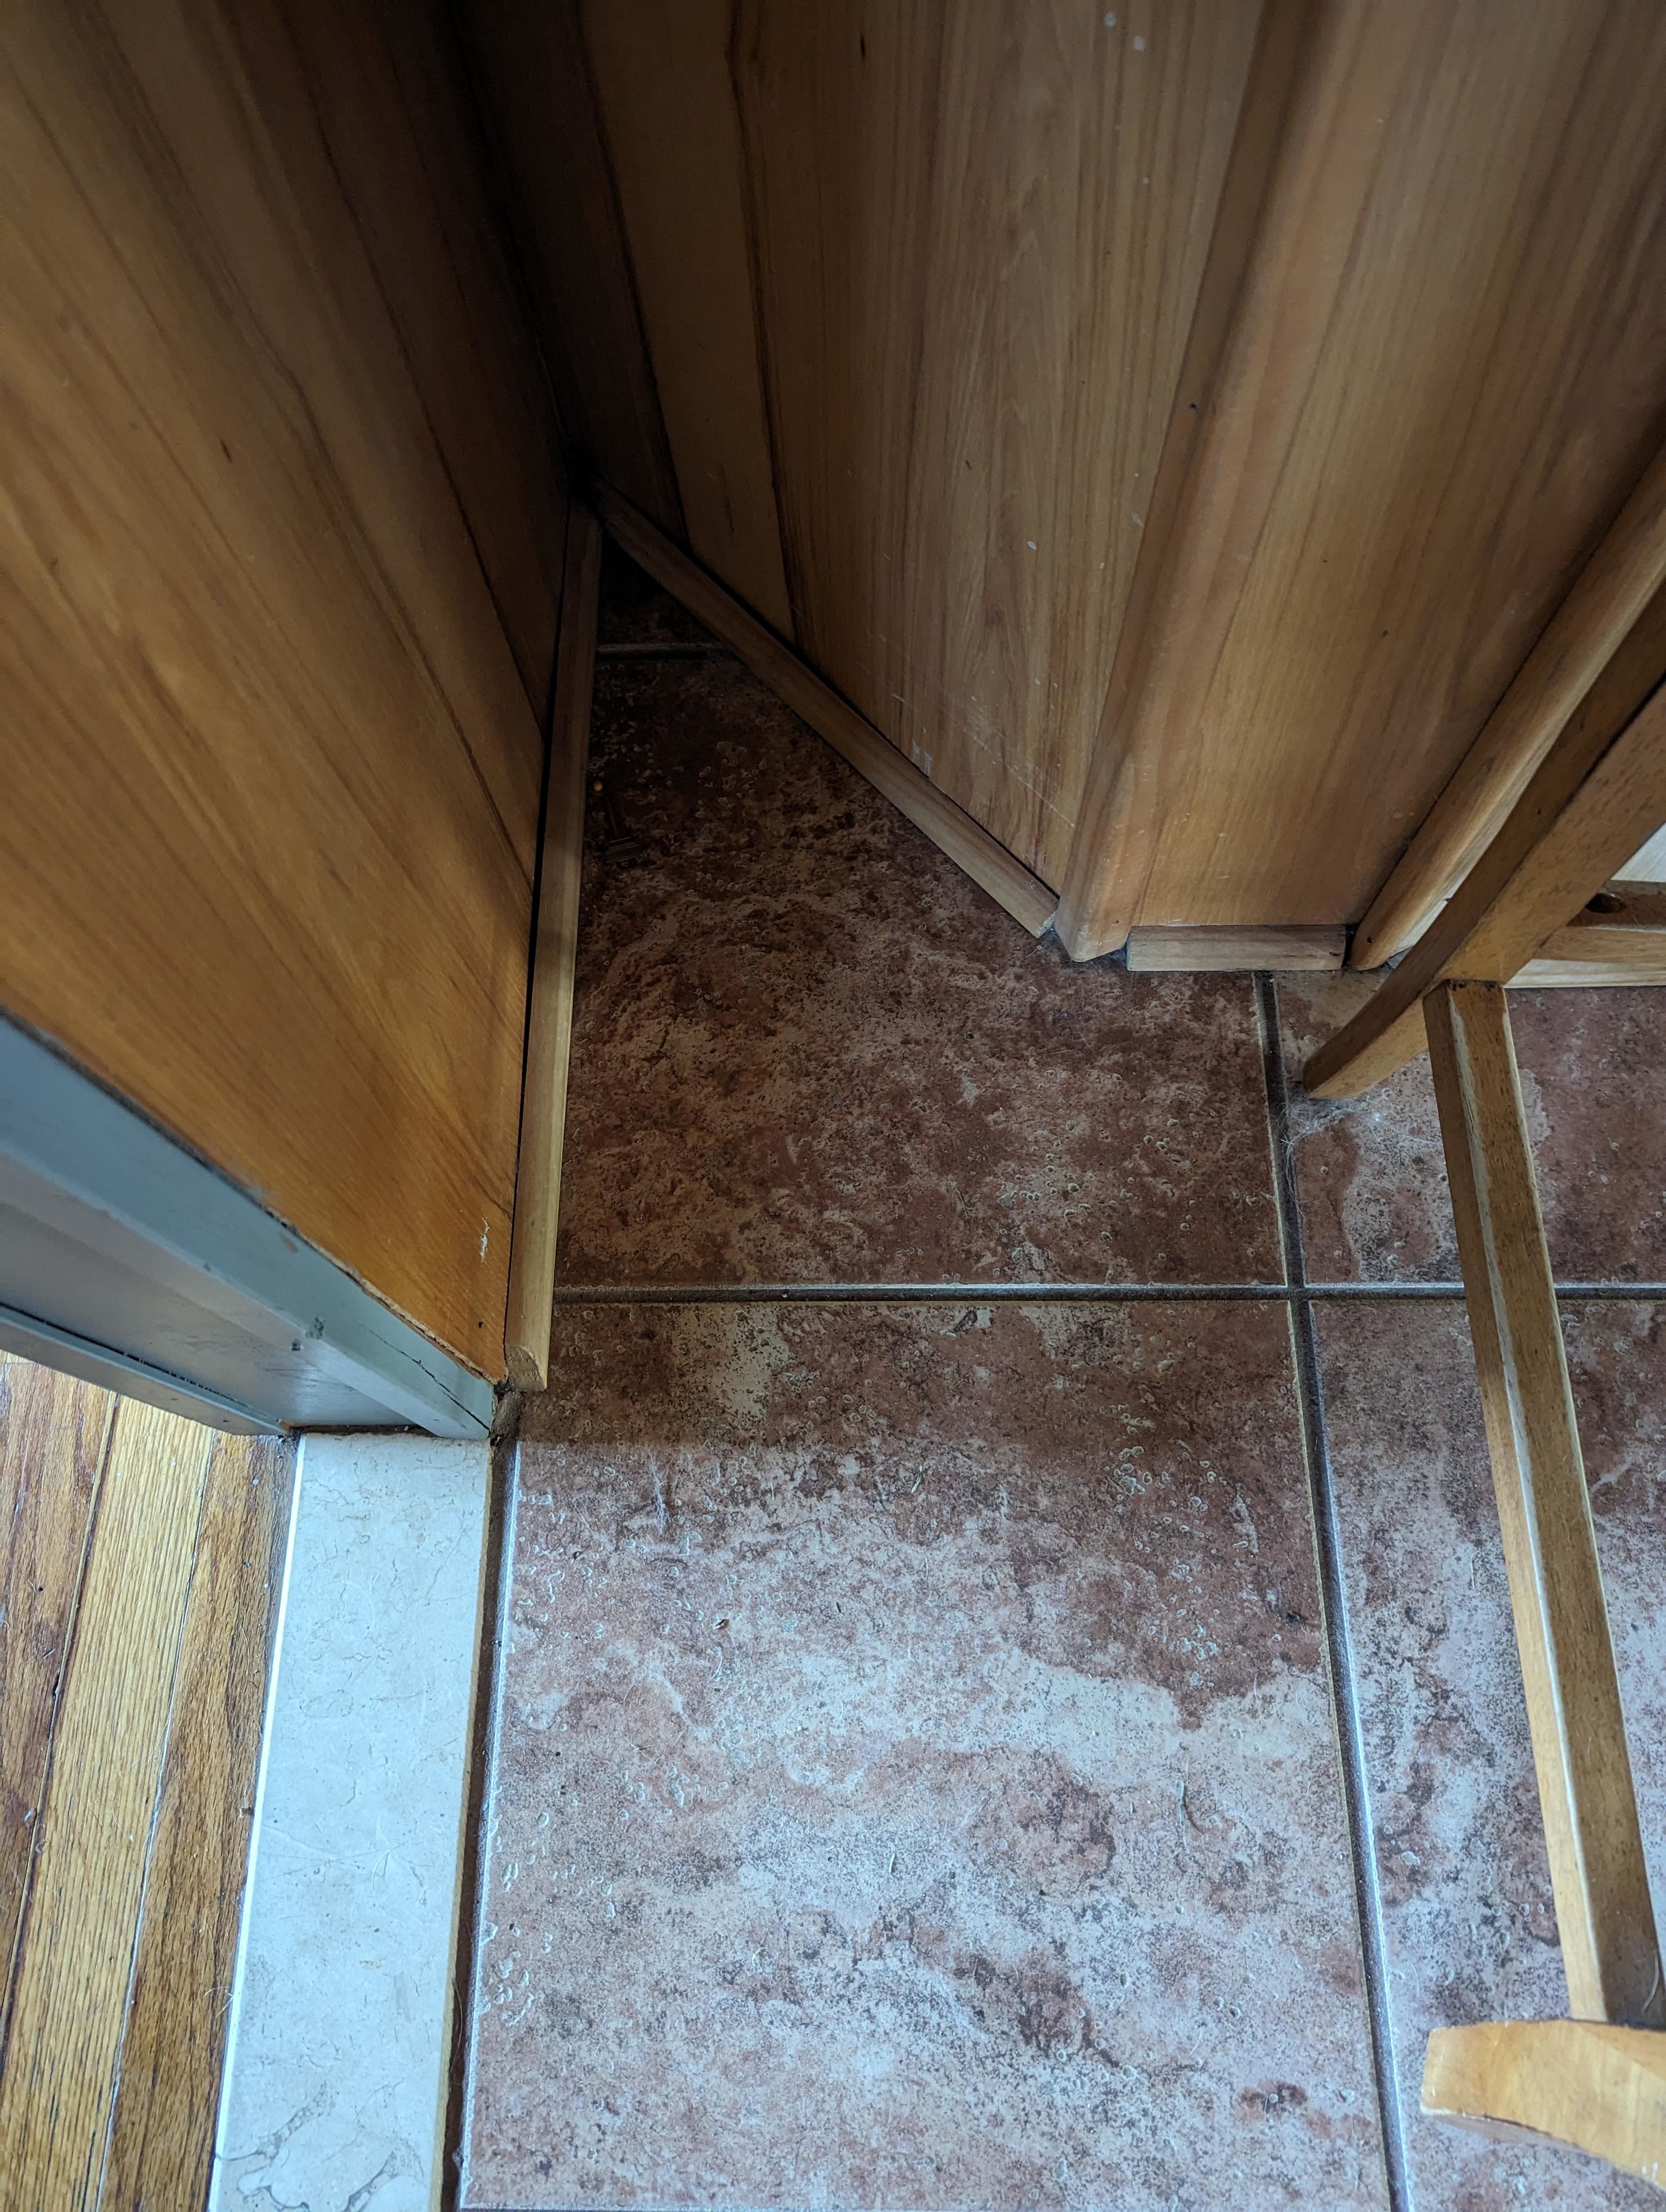 Visible corner of a room with tiled and wooden floors. Misaligned tiles and wood trim forming a narrow, awkward triangular gap